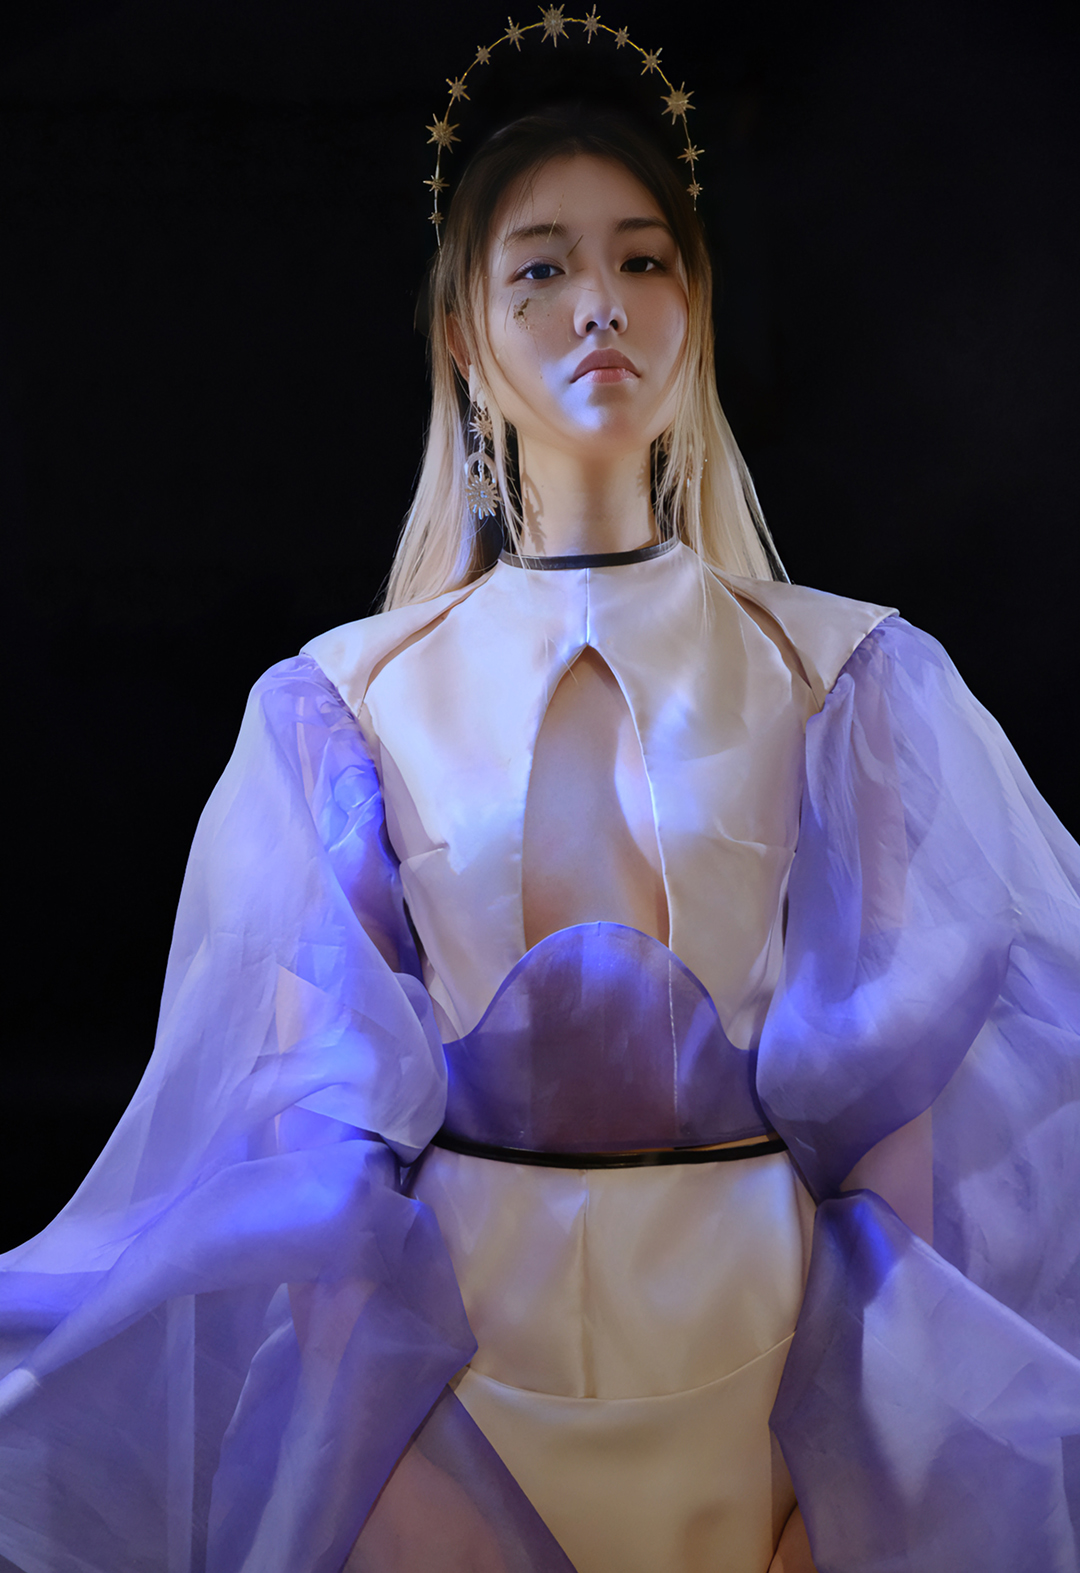 front view of a model wearing a white top with purple sleeves. There is a center front cut out and two small cut-outs at the collar bone. The background is black.